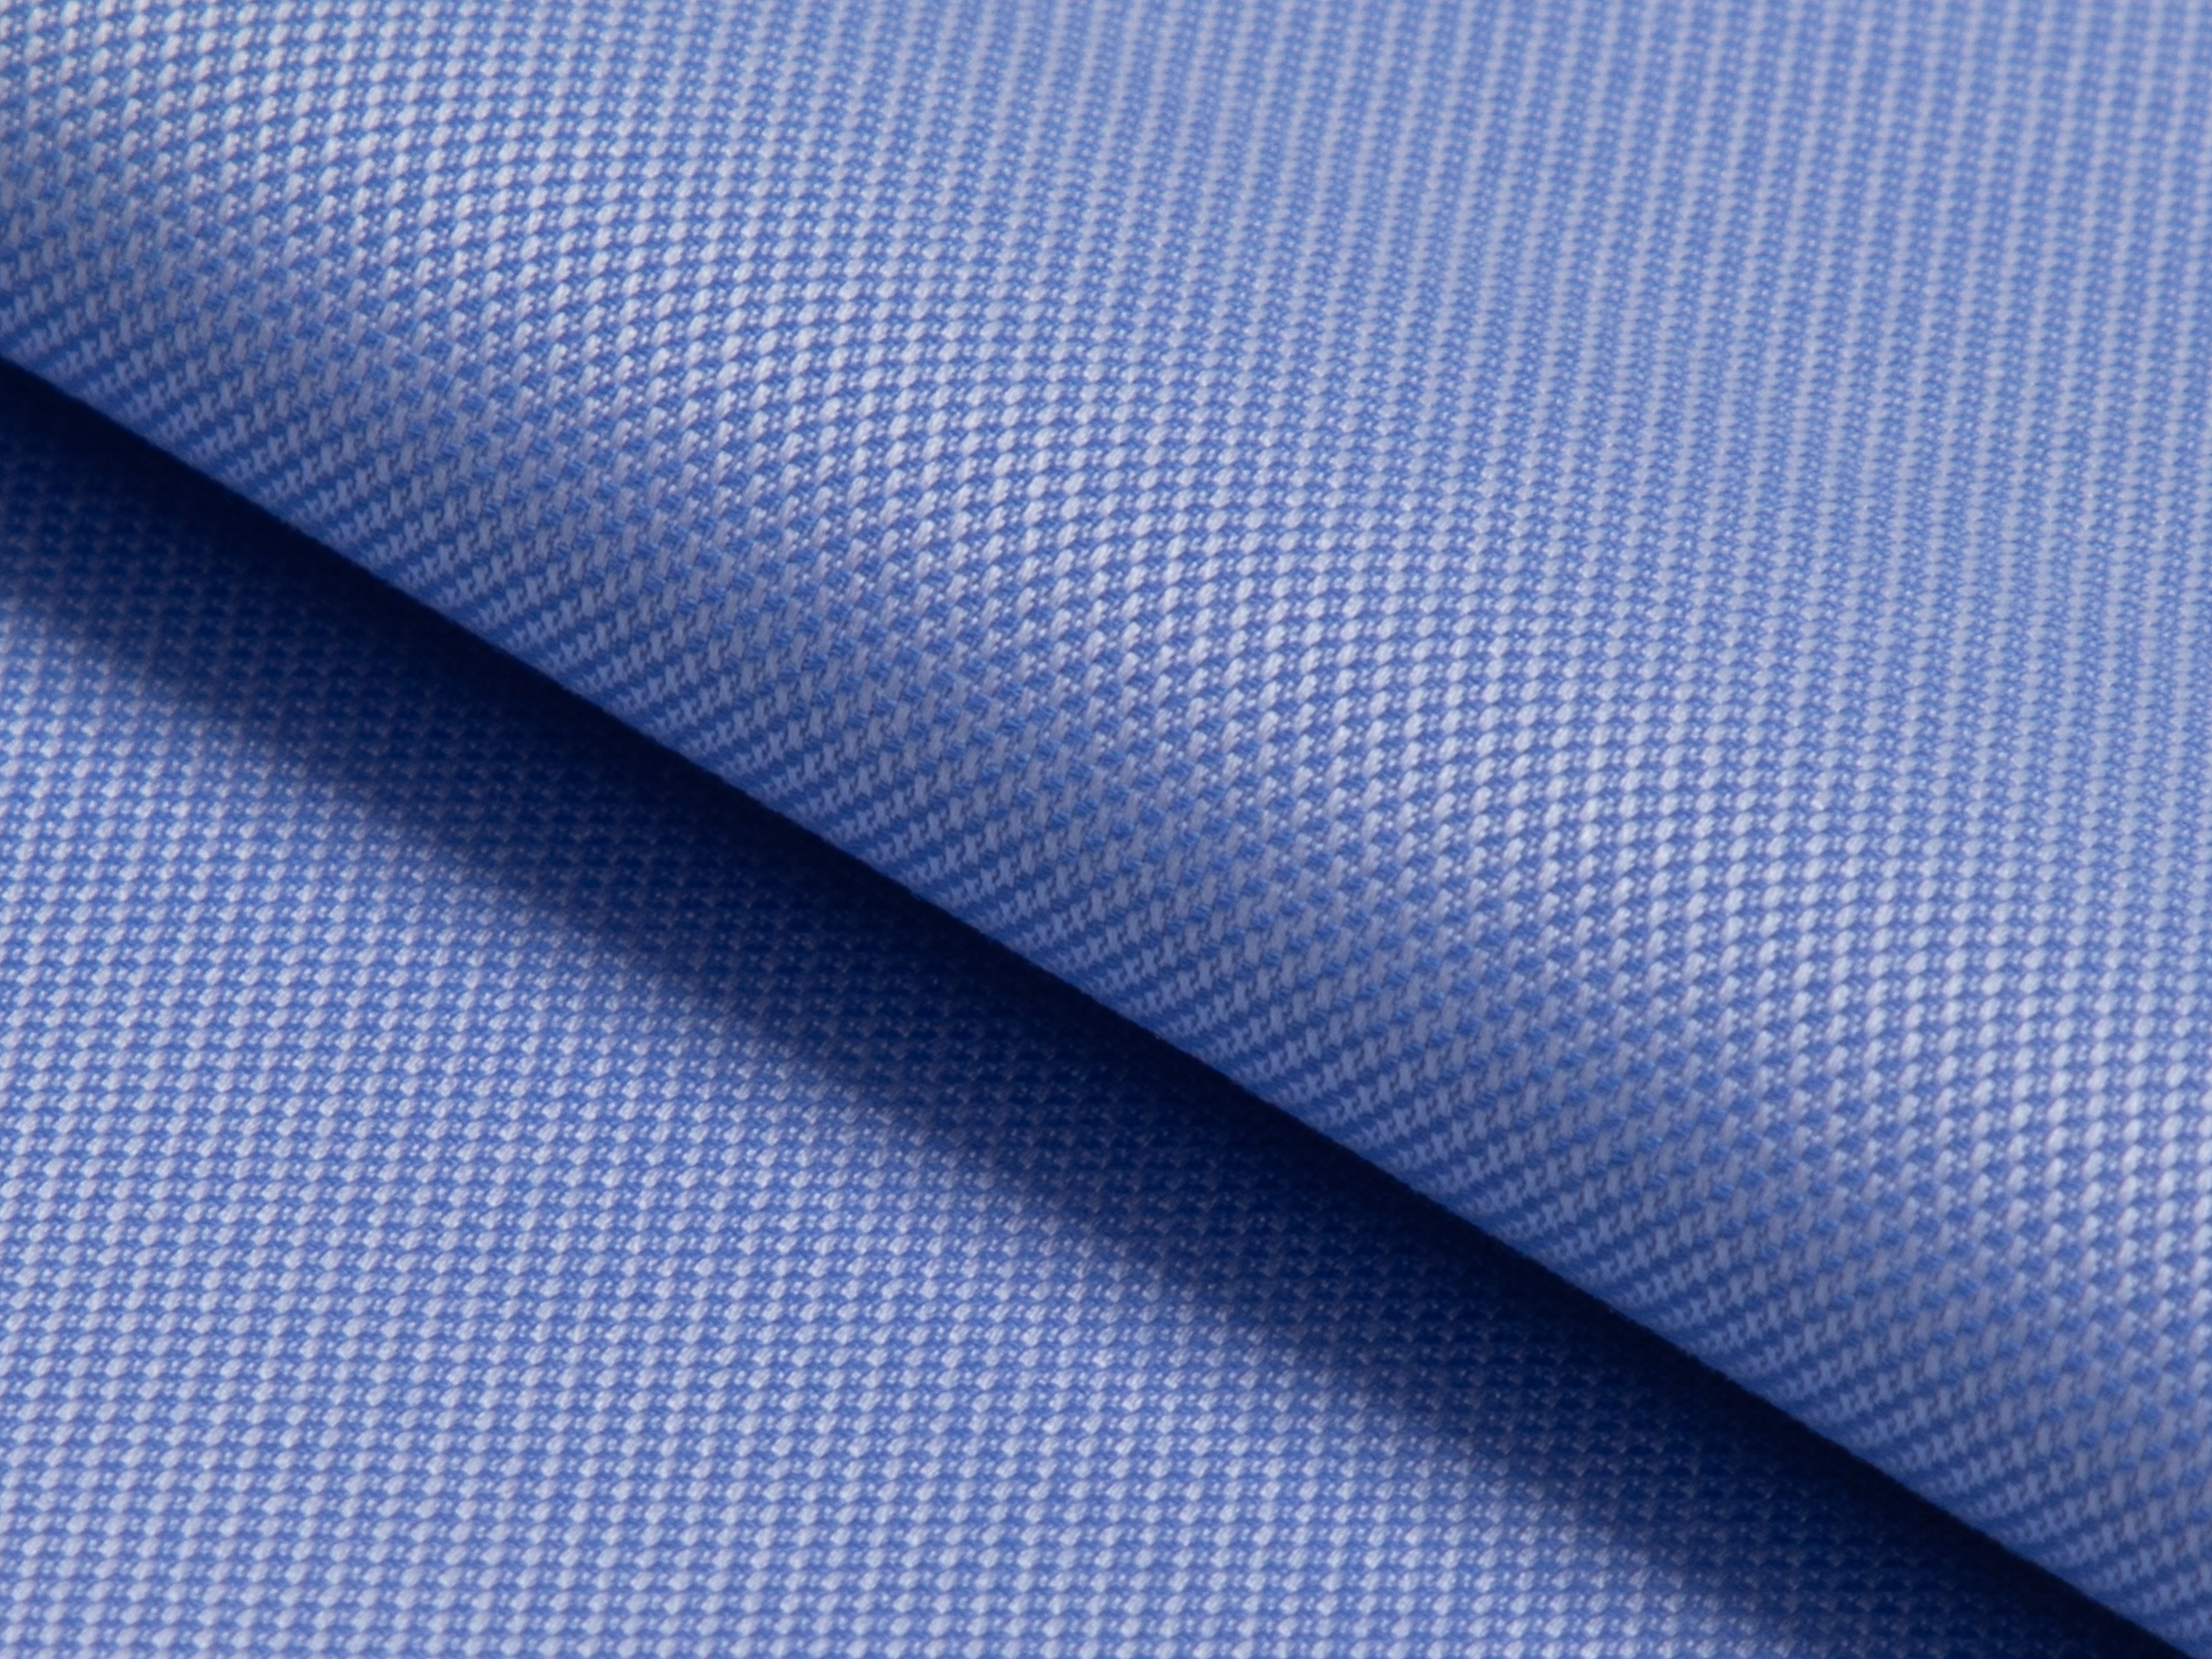 Buy tailor made shirts online -  - Pinpoint Blue